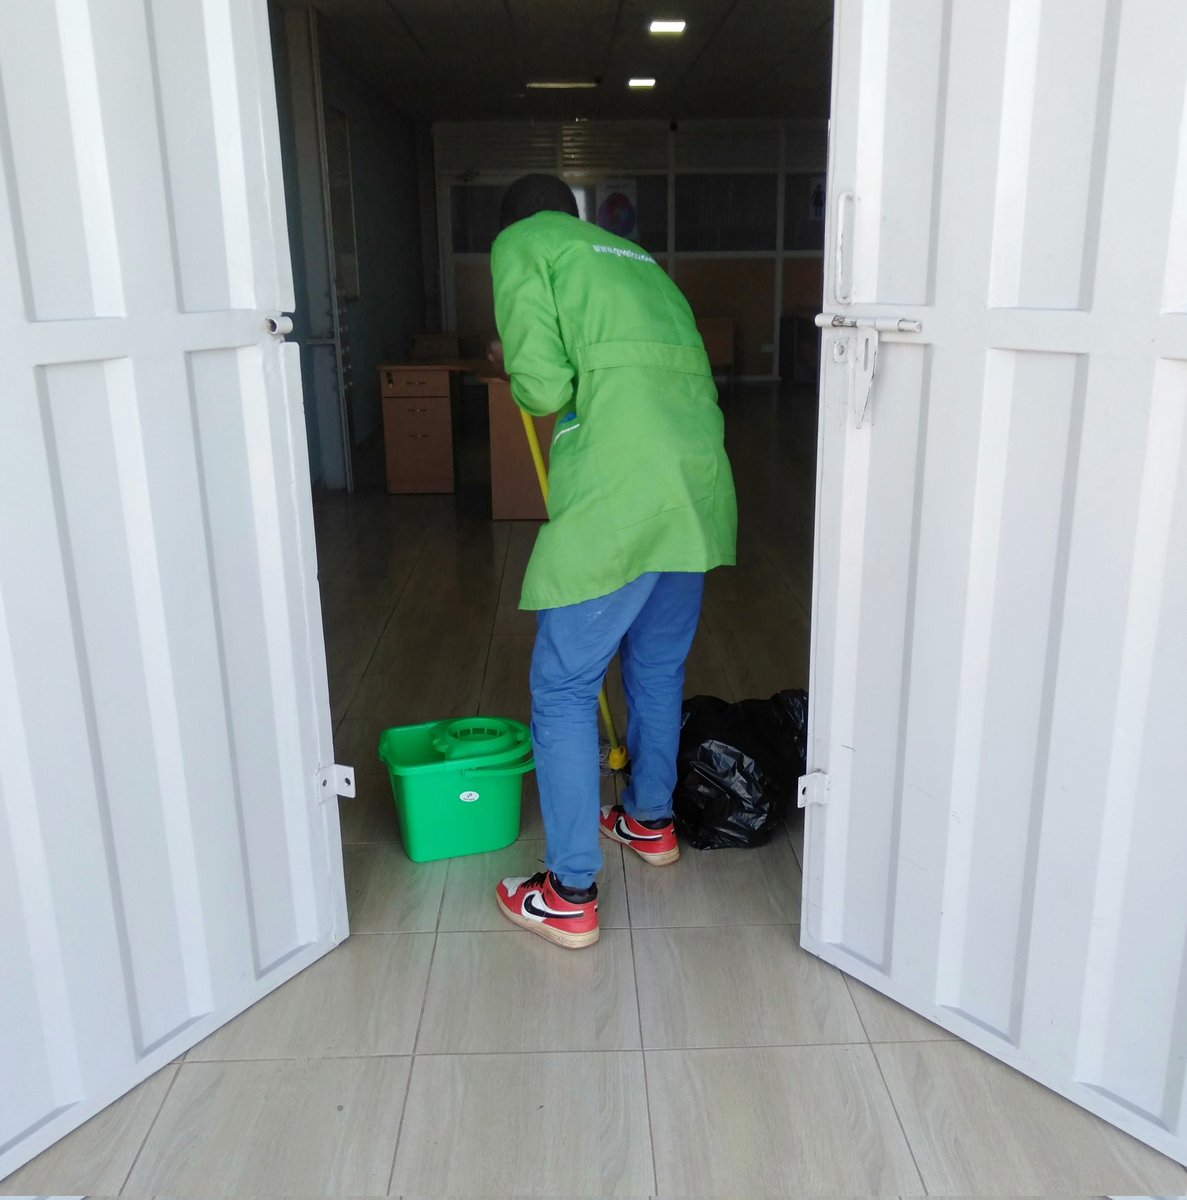 Fumigation,sofa set cleaning,office and residential cleaning services at our clients' premises. Contact us for a quote,our communication lines are ever open. Call,message or whats app us on 0713 163 918.Visit our website greeniconcleaning.co.ke